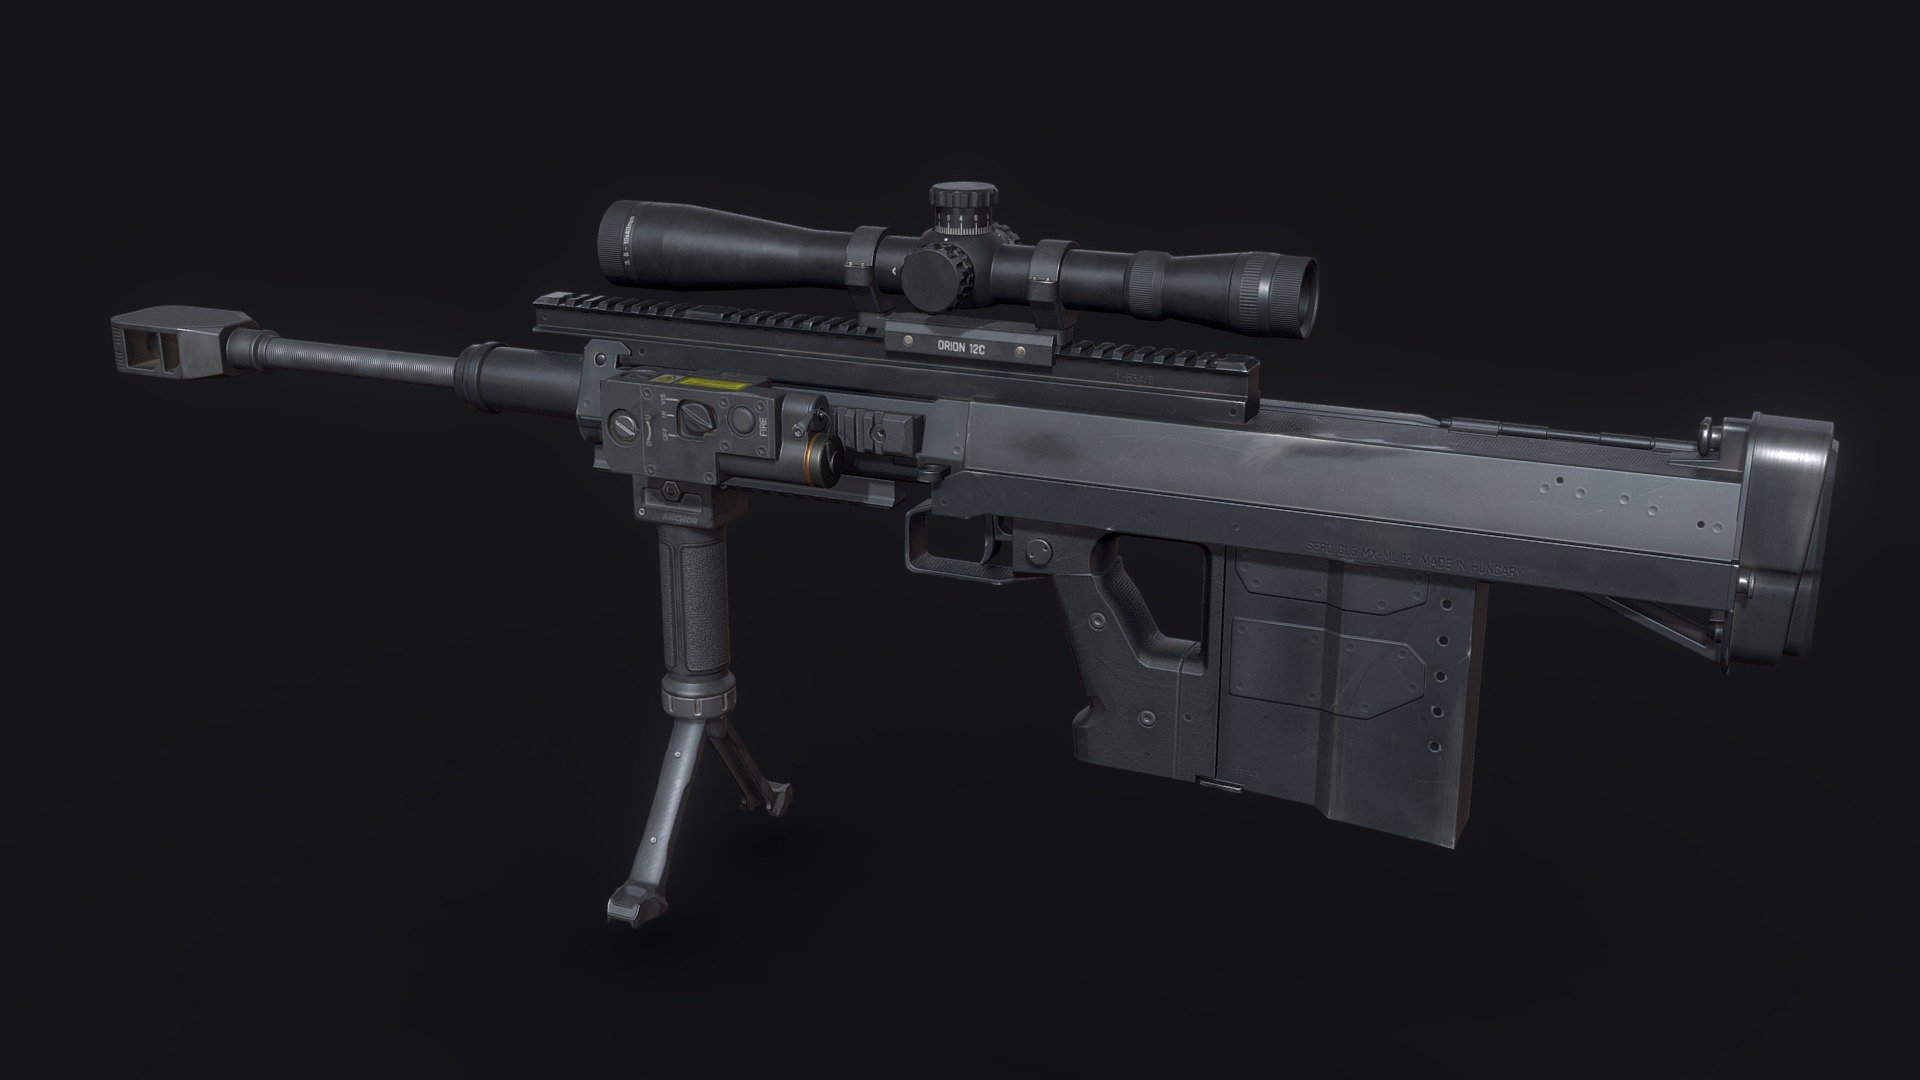 Low-poly Game-Ready Anti-Material High-caliber 50 BMG Sniper-Rifle GM6 Lynx;

Polycount(Tris):
 -Sniper Rifle - 7025;
 -Sniper Sight - 4022;
 -Bipod Grip - 3122;
 -Laser Sight - 3718;
 -Rail(x1) - 744;

-Suppressor(muzzle) - 1008; UV-mapped. Textures: 4k in package 3d model